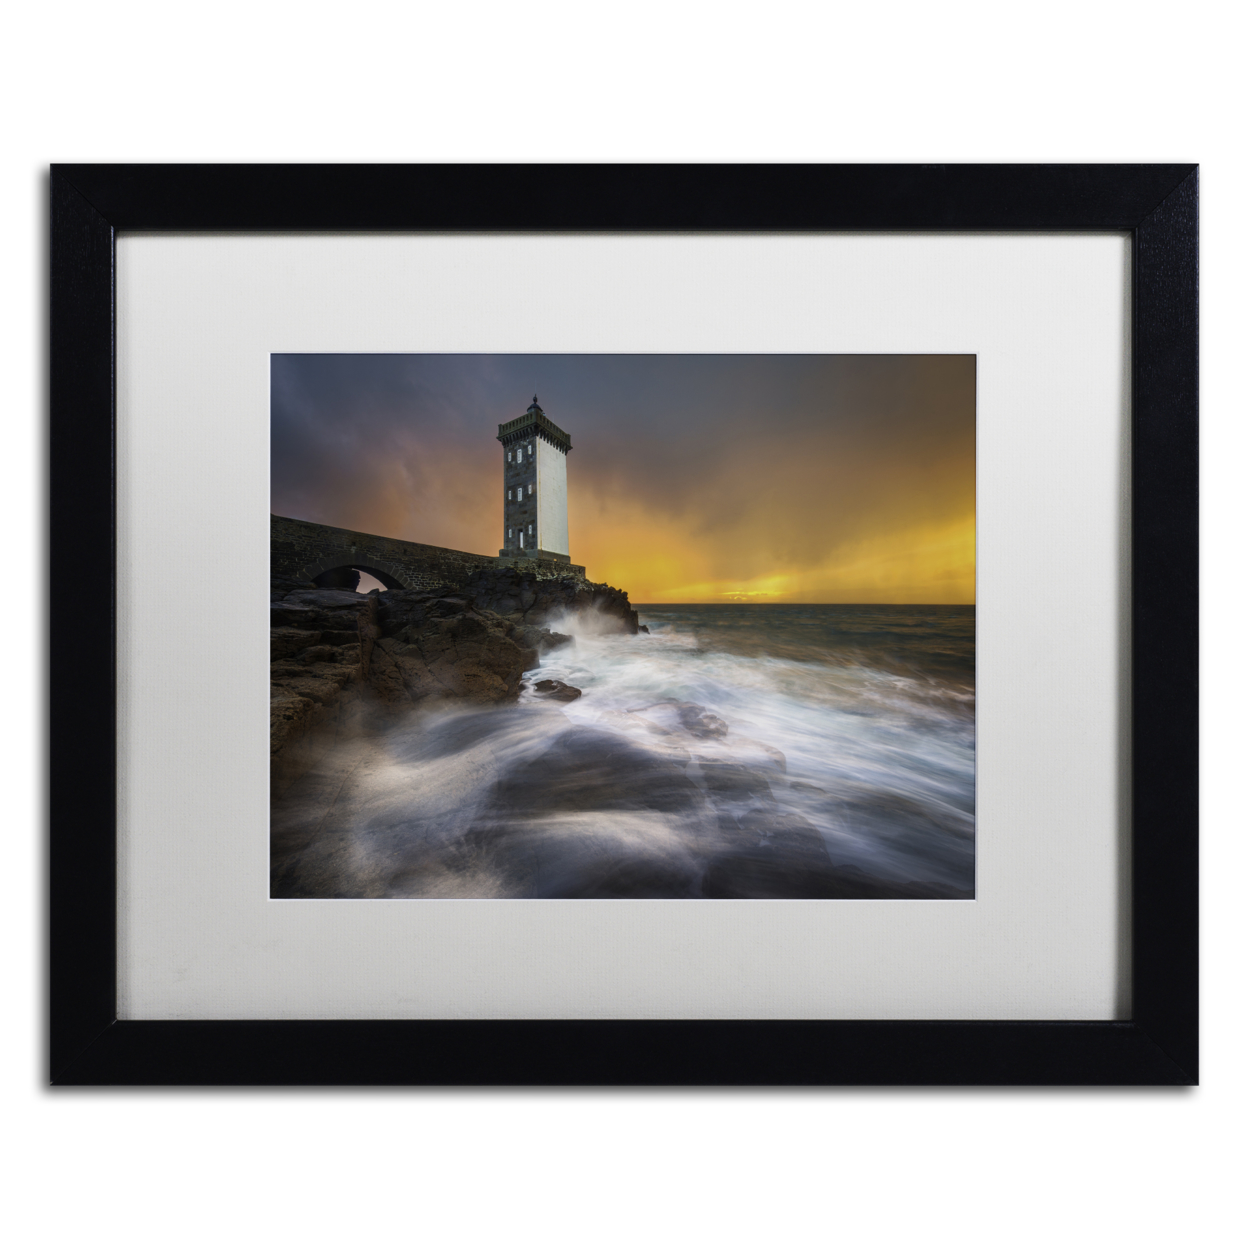 Mathieu Rivrin 'Light Of The Year In Brittany' Black Wooden Framed Art 18 X 22 Inches